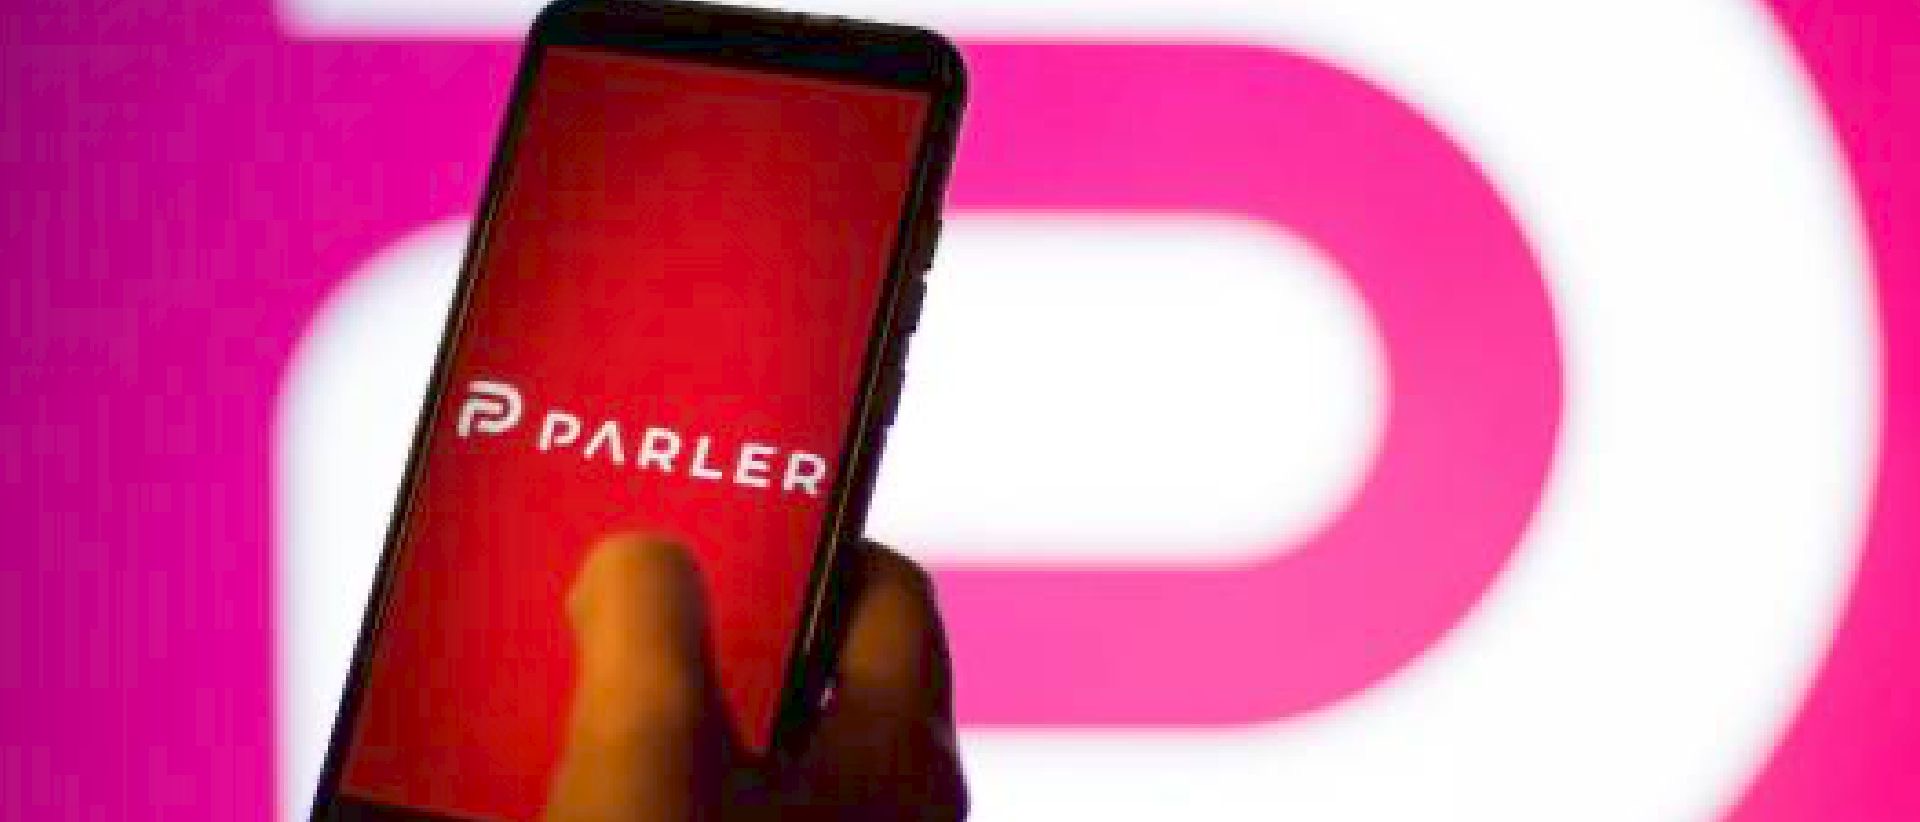 Parler Interim CEO Says The Company Is ‘Keeping All Our Legal Options Open’ Following Big Tech Pile On